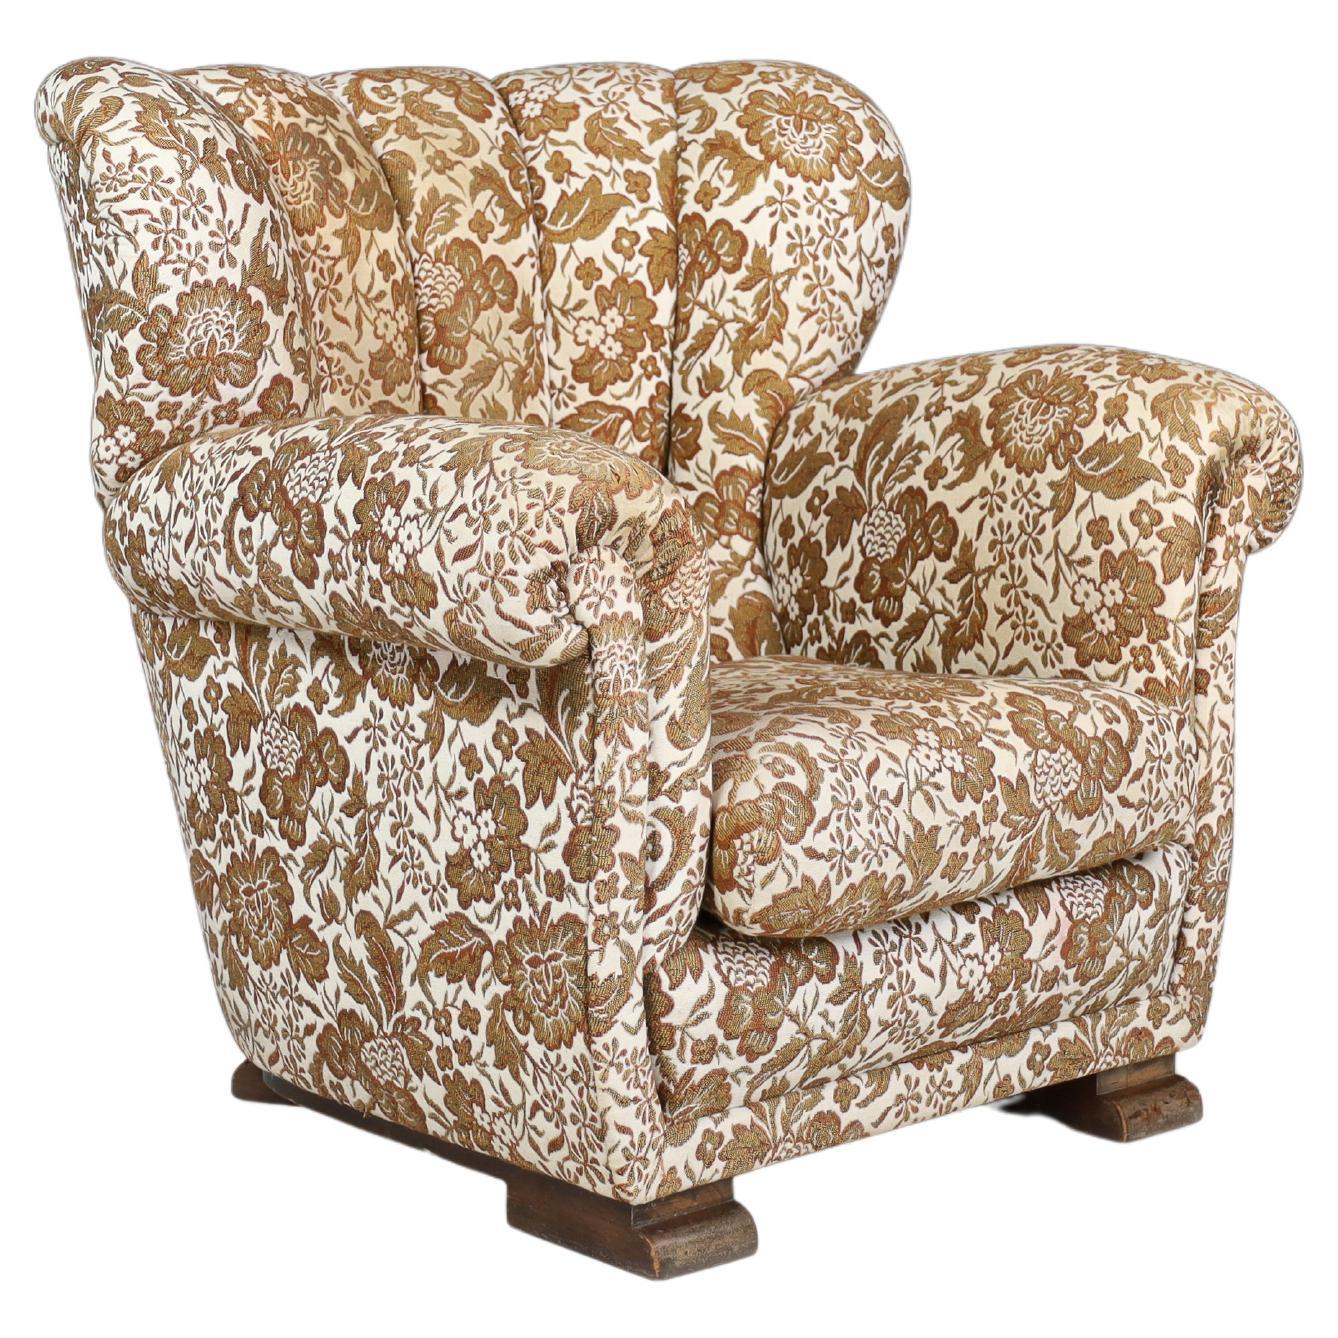 Art Deco Armchair in Original Floral Upholstery, Praque 1930 For Sale